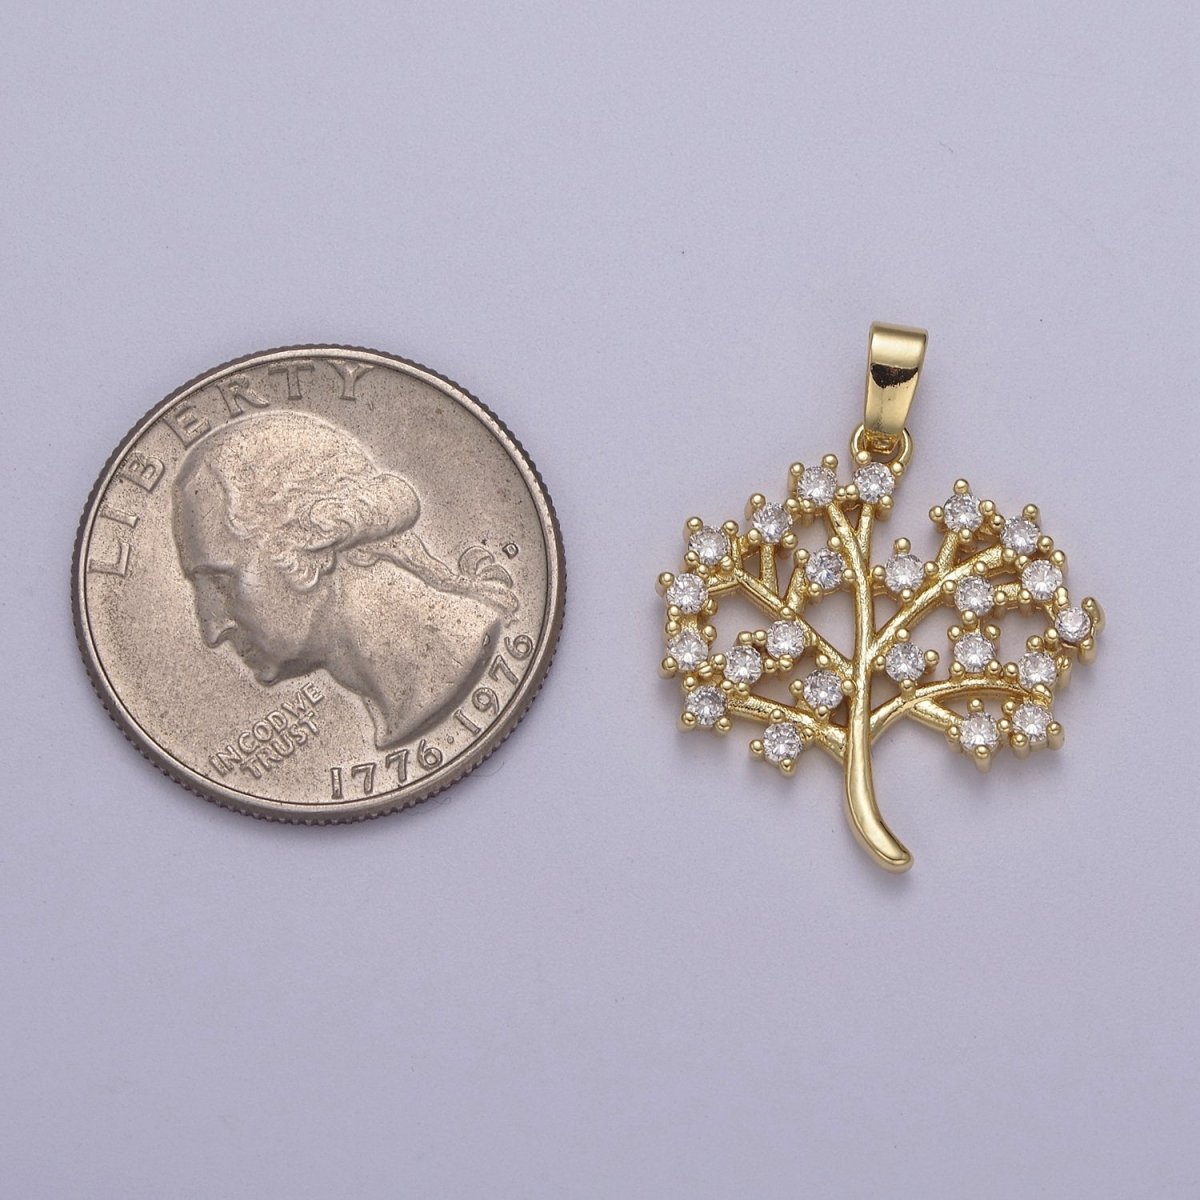 Dainty Gold Tree Pendant with Clear Micro Pave Cz Stone J-504 - DLUXCA